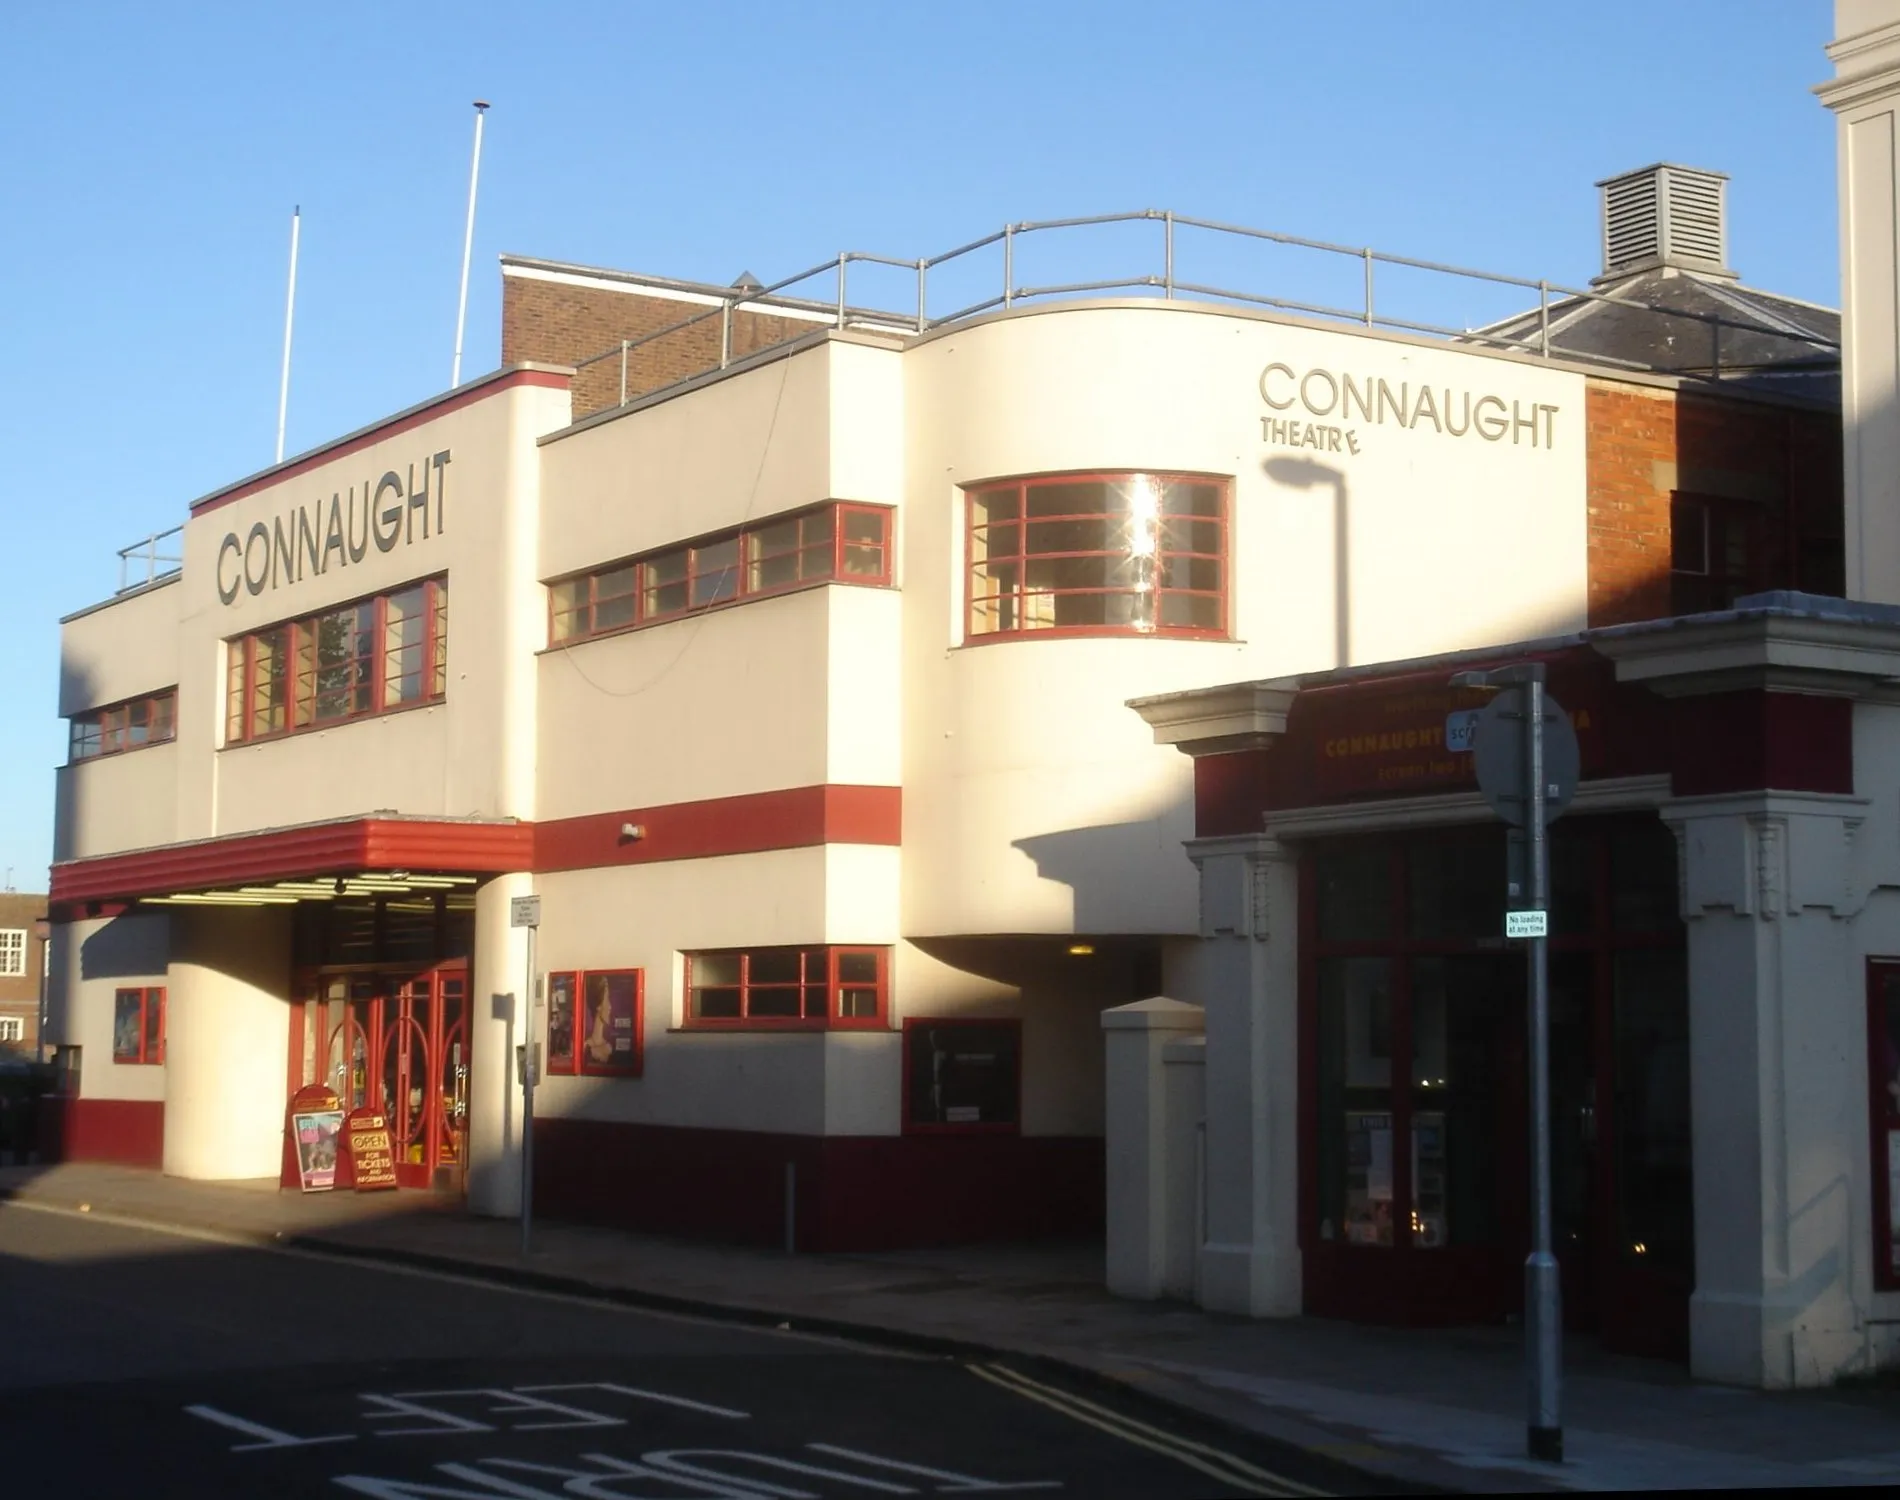 Photo showing: Connaught Theatre, Union Place, Worthing, West Sussex, England. The theatre's predecessor was founded in 1916, and the licence to operate as the Connaught Theatre was granted in 1931.  It moved to this Art Deco building (previously the Picturedrome Cinema) in 1935.